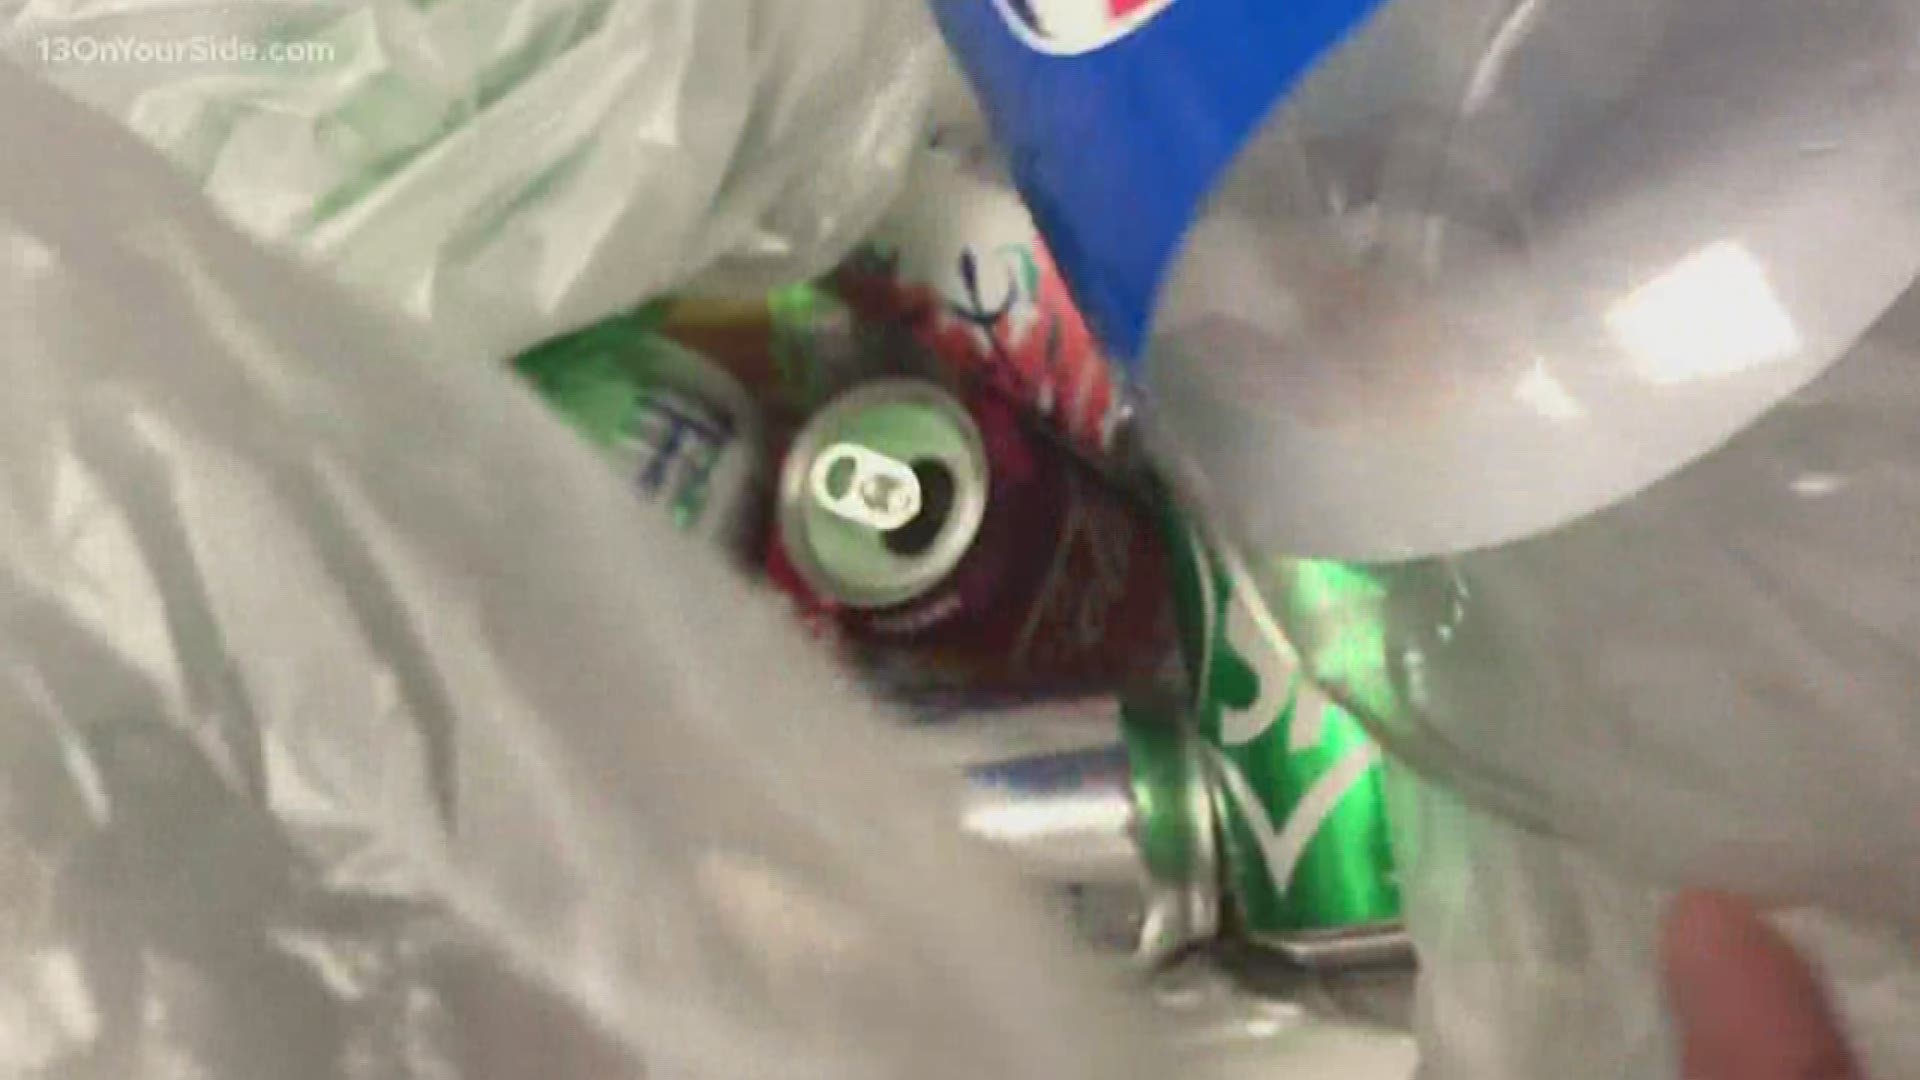 Modest bottle slips were forged and returned at automated machines at several Meijer stores in West Michigan. Now, the ring leader of the operation faces up to between five and 20 years in prison for conducting a criminal enterprise.